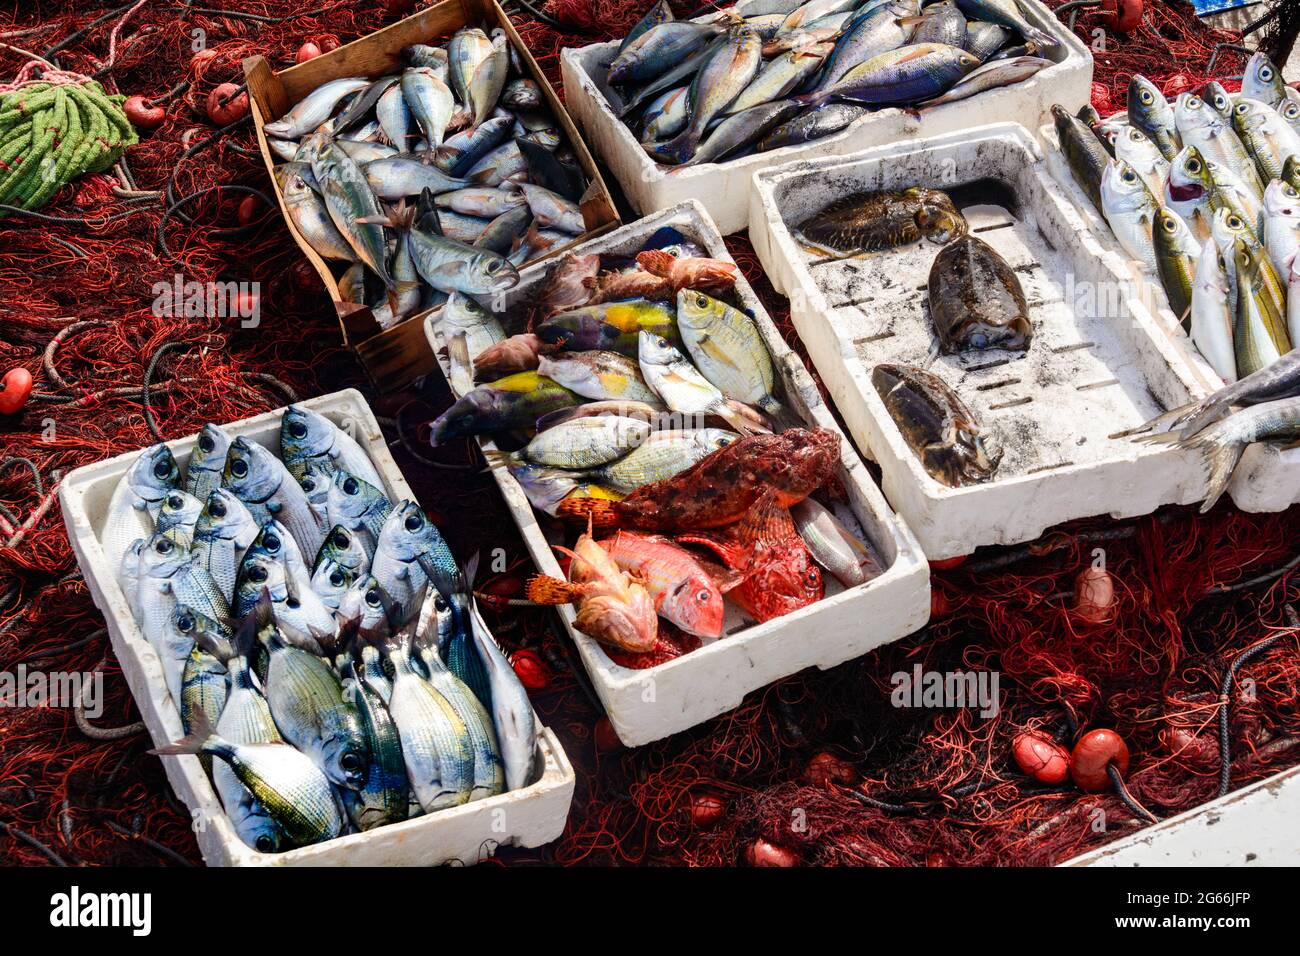 Gilt head bream, red mulet, cuttlefish, fished from the day Stock Photo